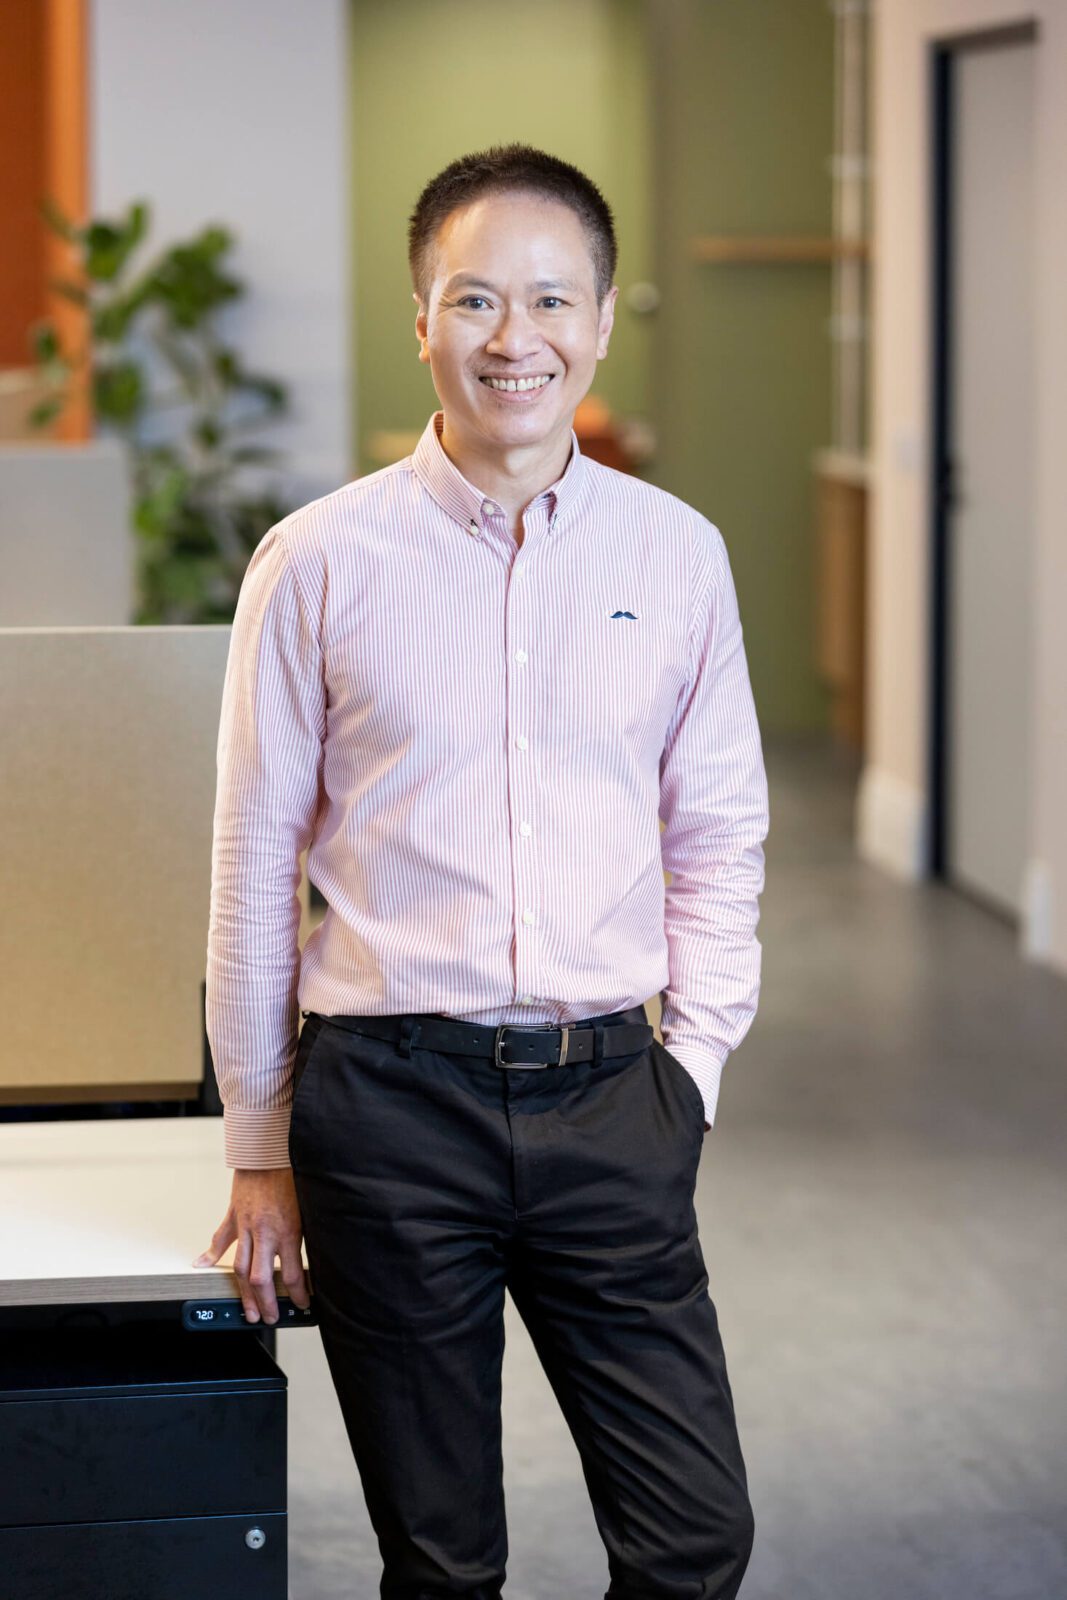 Man in pink pin-striped shirt, black pants, leans against desk in office, smiles broadly to camera